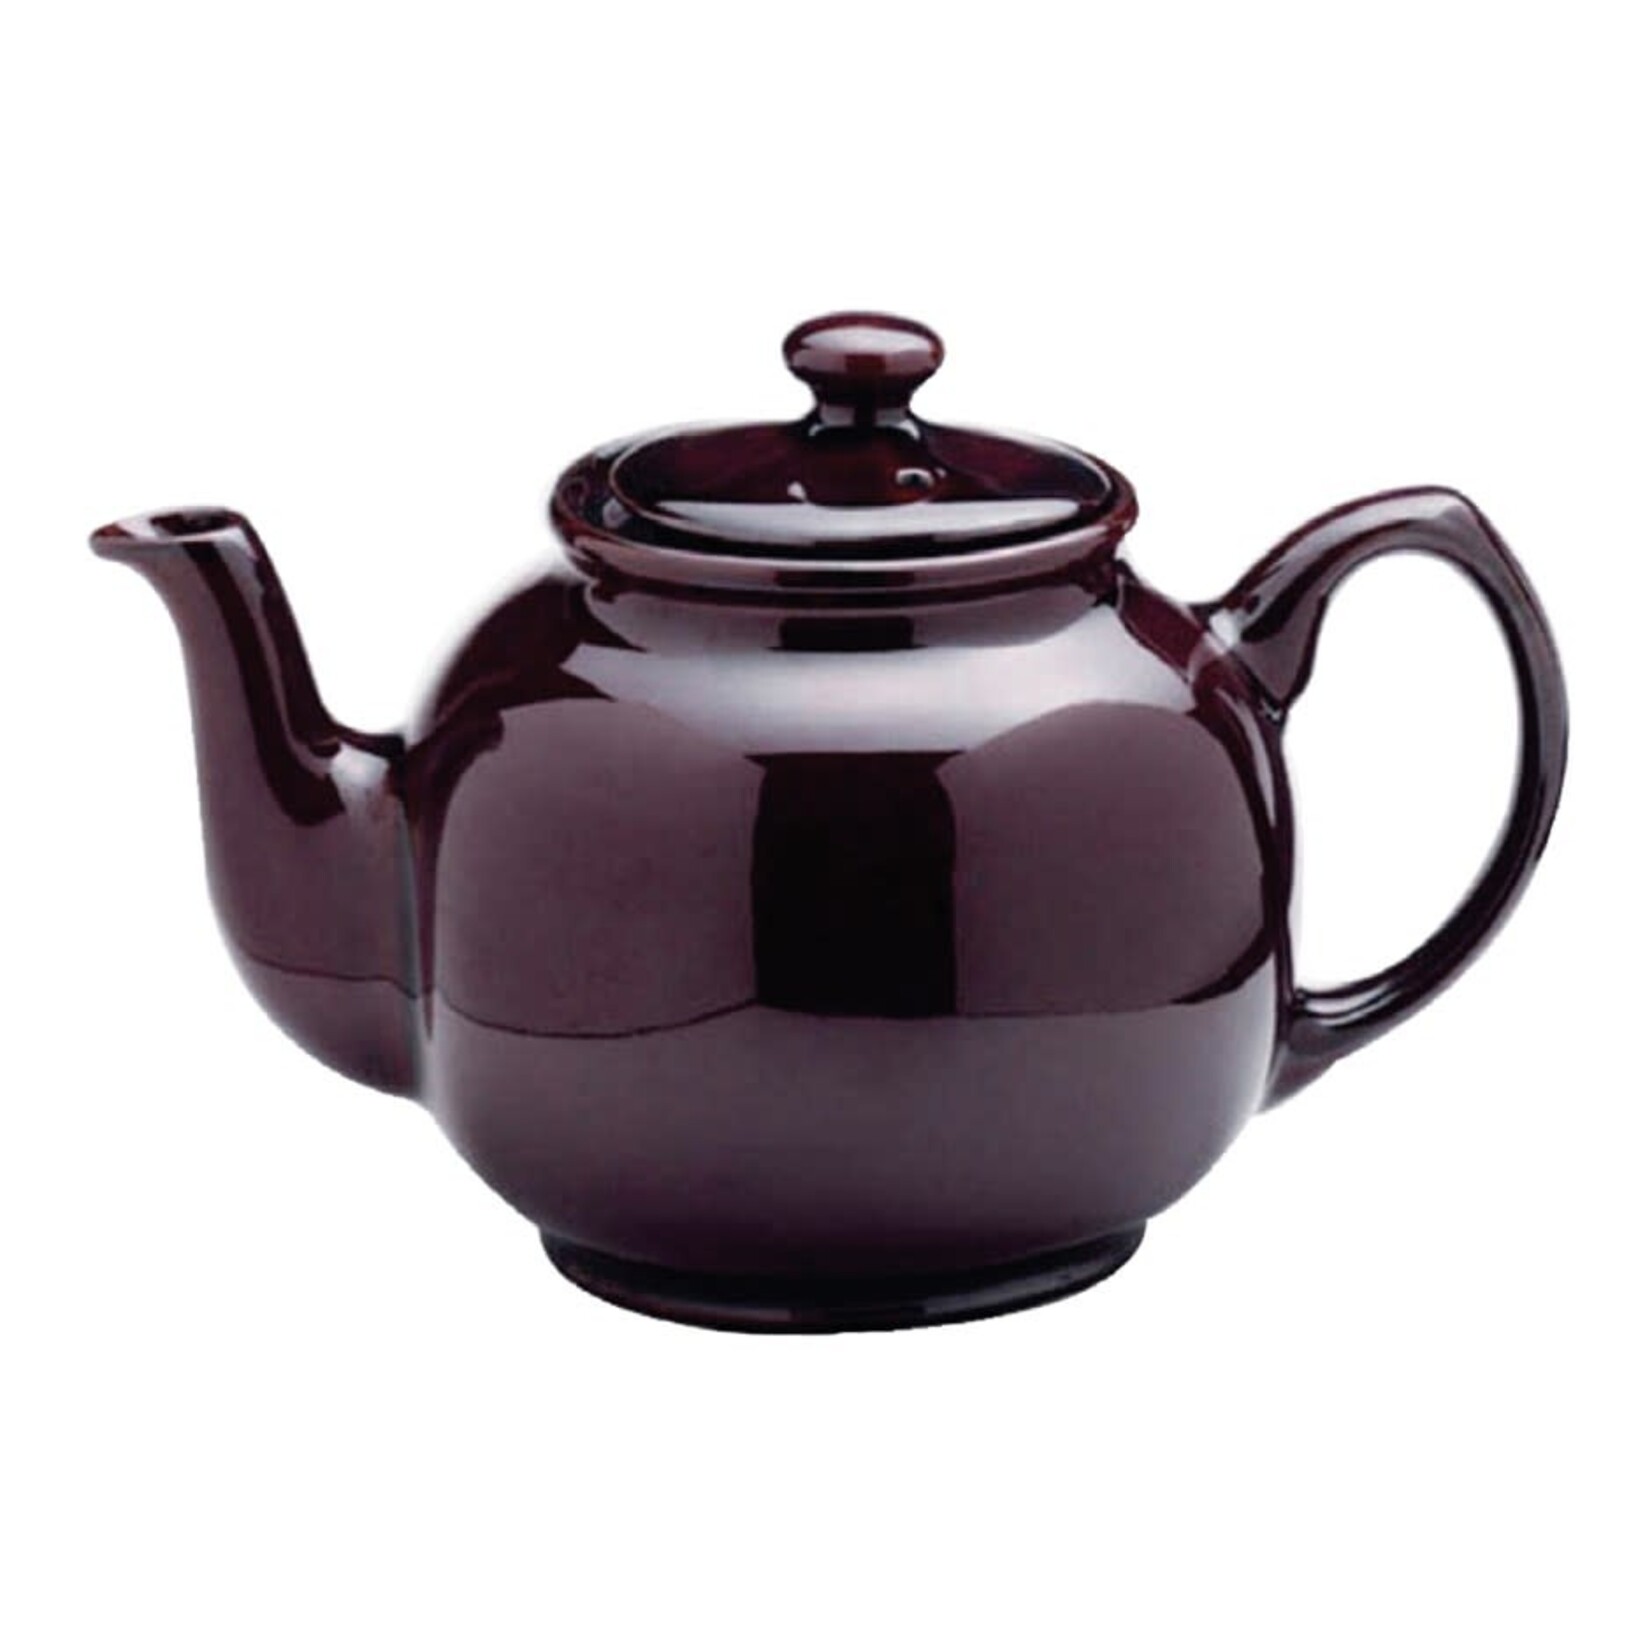 PORT STYLE CLASSIC Teapot 6 cup Rockingham Brown